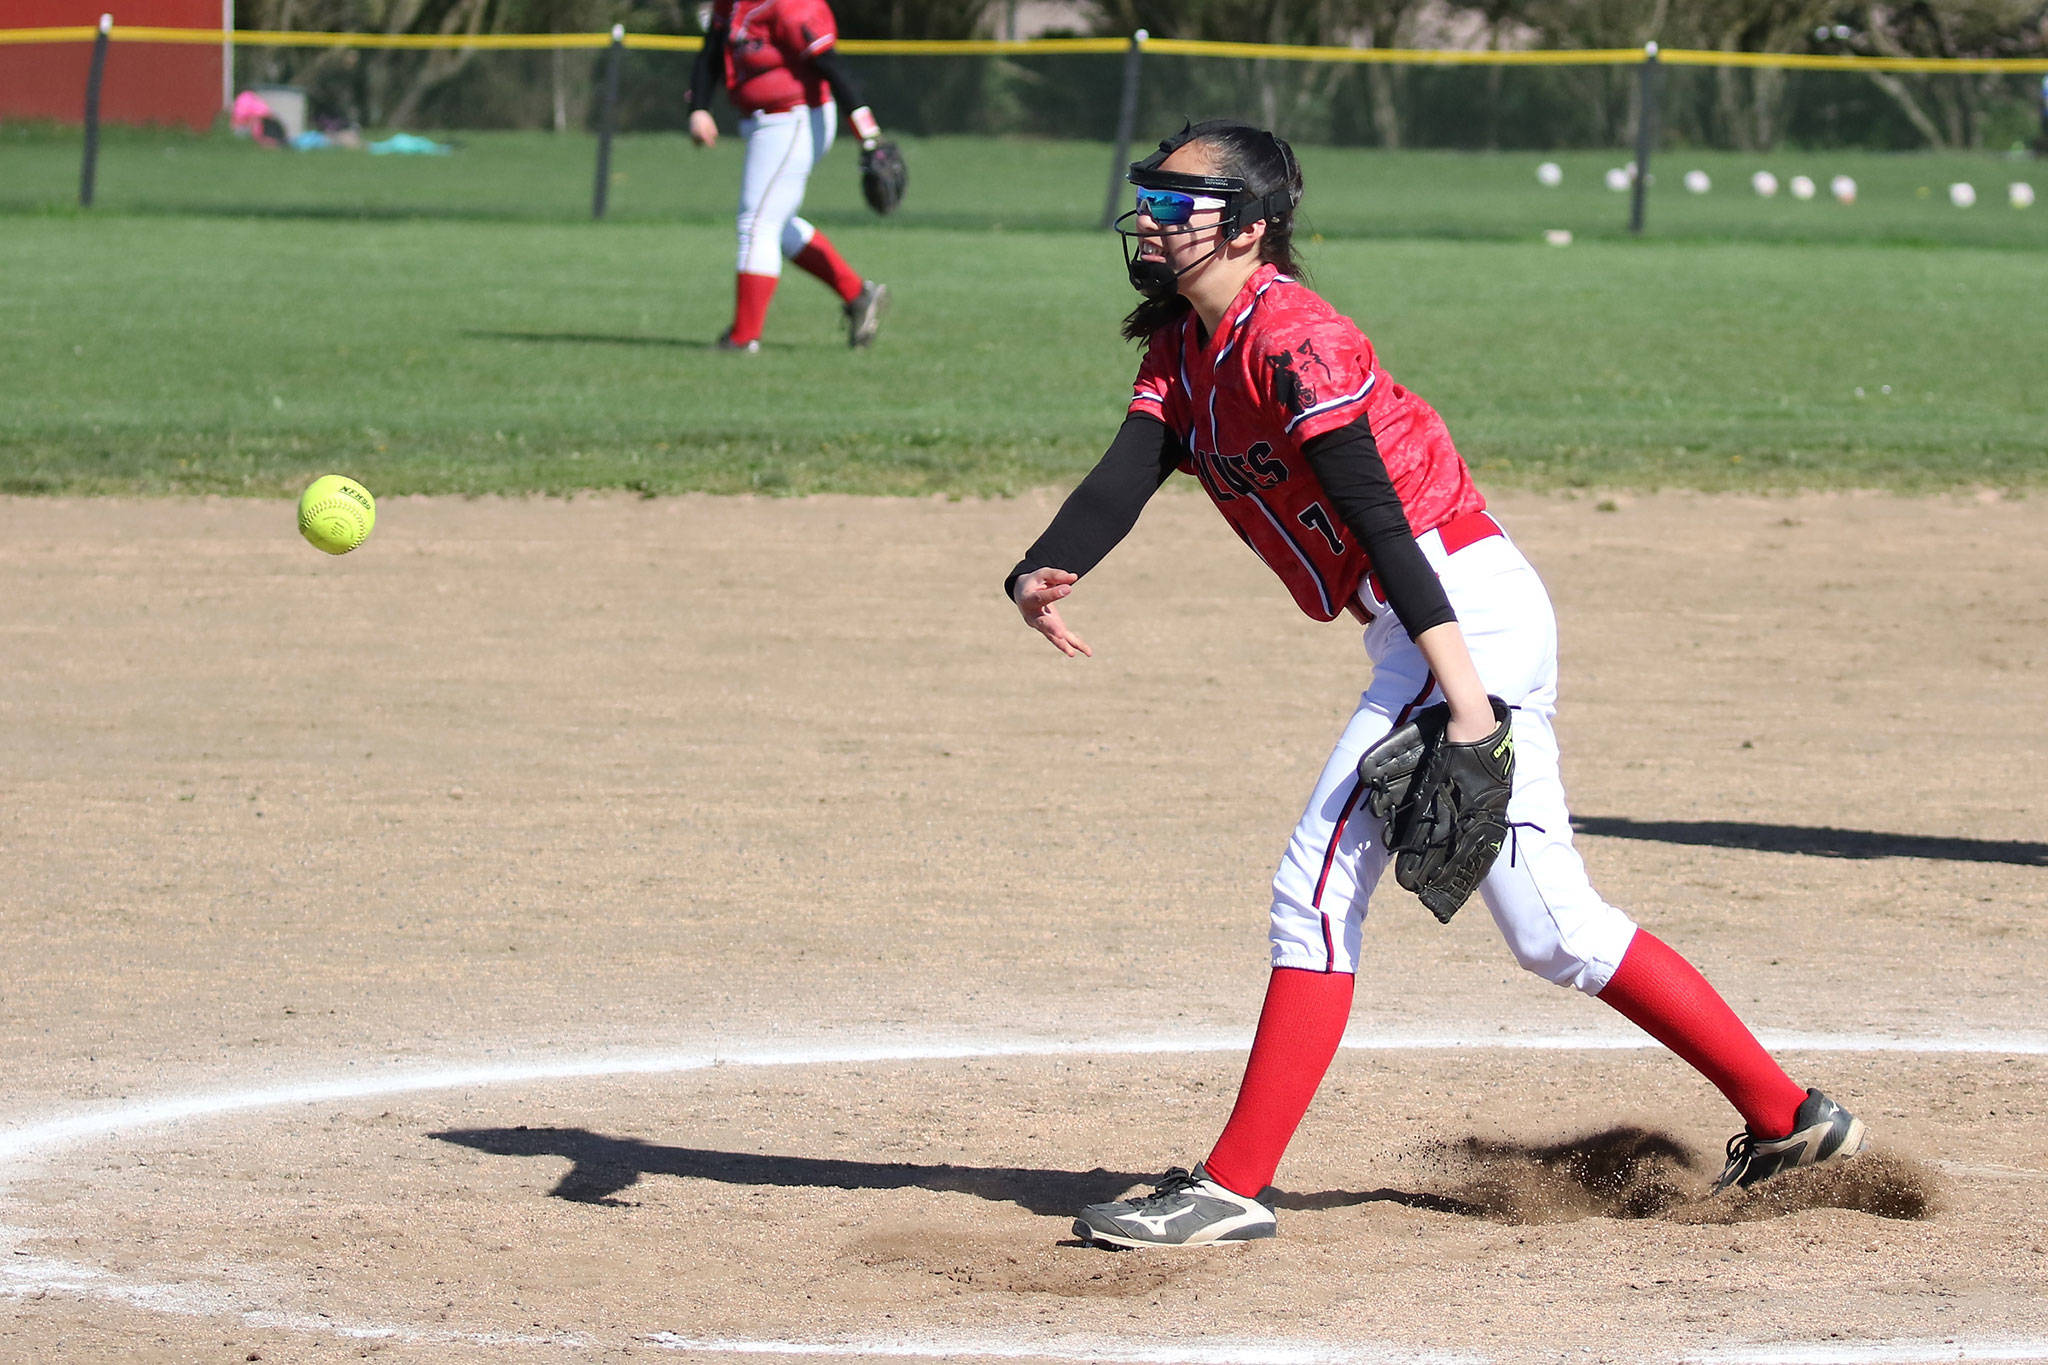 Scout Smith, shown here, combined with Katrina McGranahan to toss a no-hitter. (Photo by John Fisken)